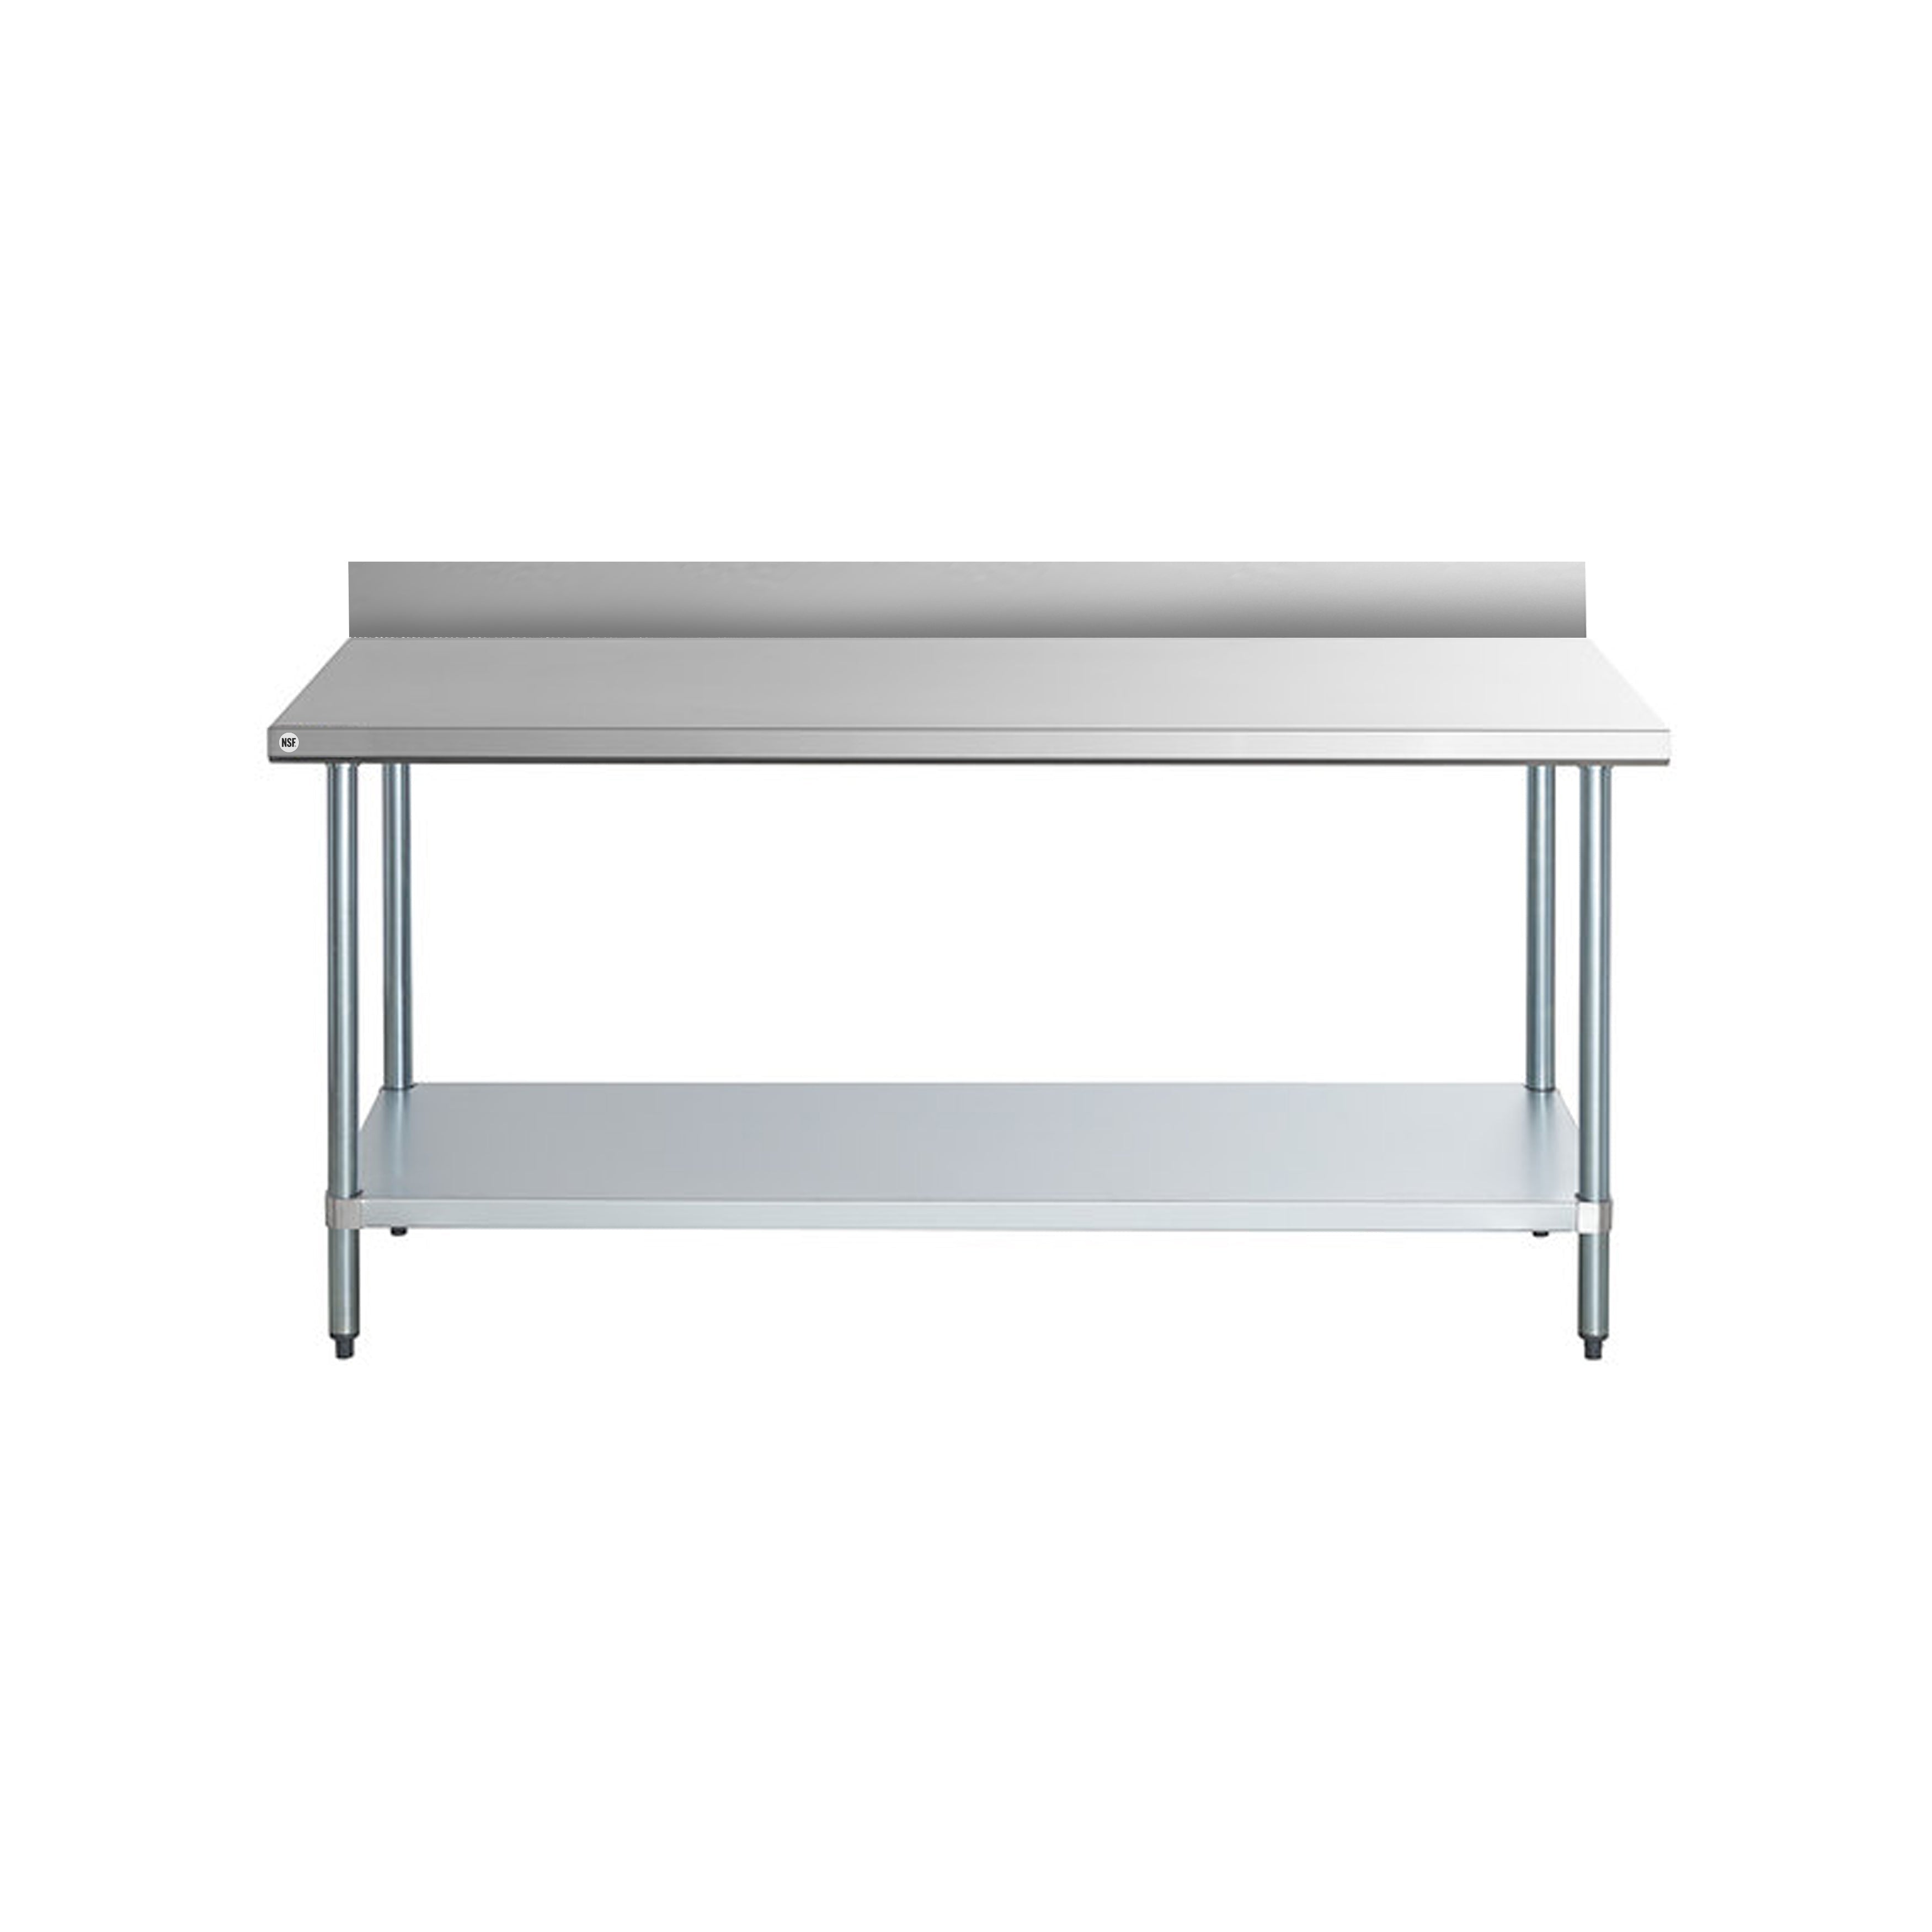 Omcan - 23797, Commercial 60" x 24" Stainless Steel Kitchen Work Table with 4" Back Splash 1100lbs Medium Duty